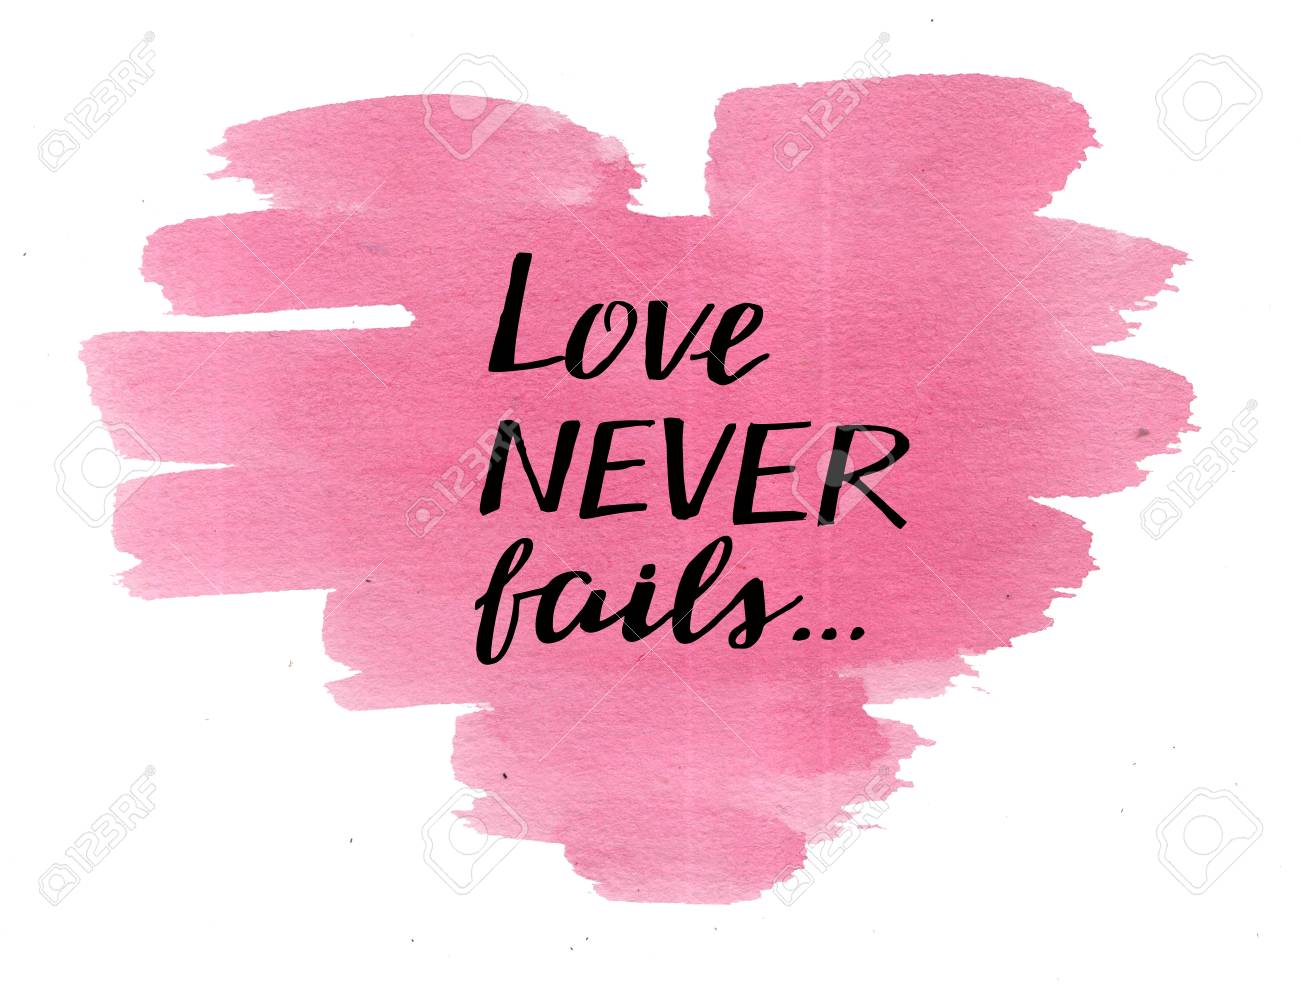 Hand Lettering Love Never Fails Made On Watercolor Pink Heart